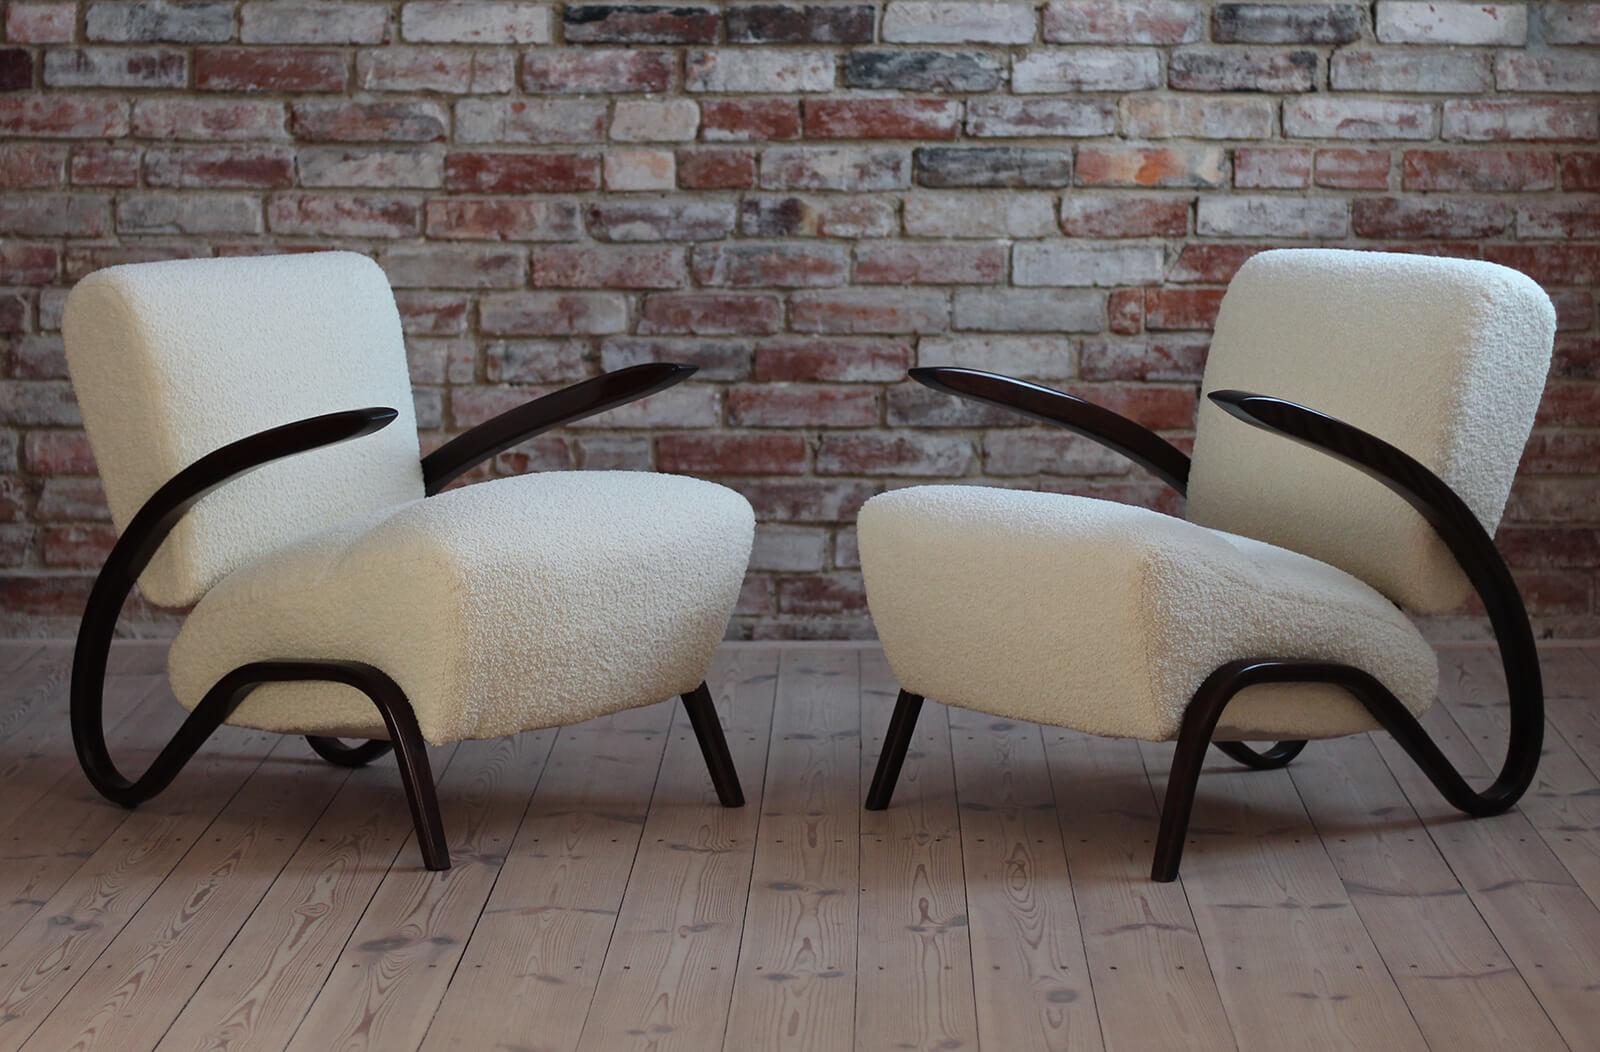 Set of two Art Deco armchairs designed by famous Jindrich Halabala in 1930s in Czechoslovakia. One of his extremely rare and iconic models, H275. The armchairs have been professionally restored and reupholstered. The wooden elements have been